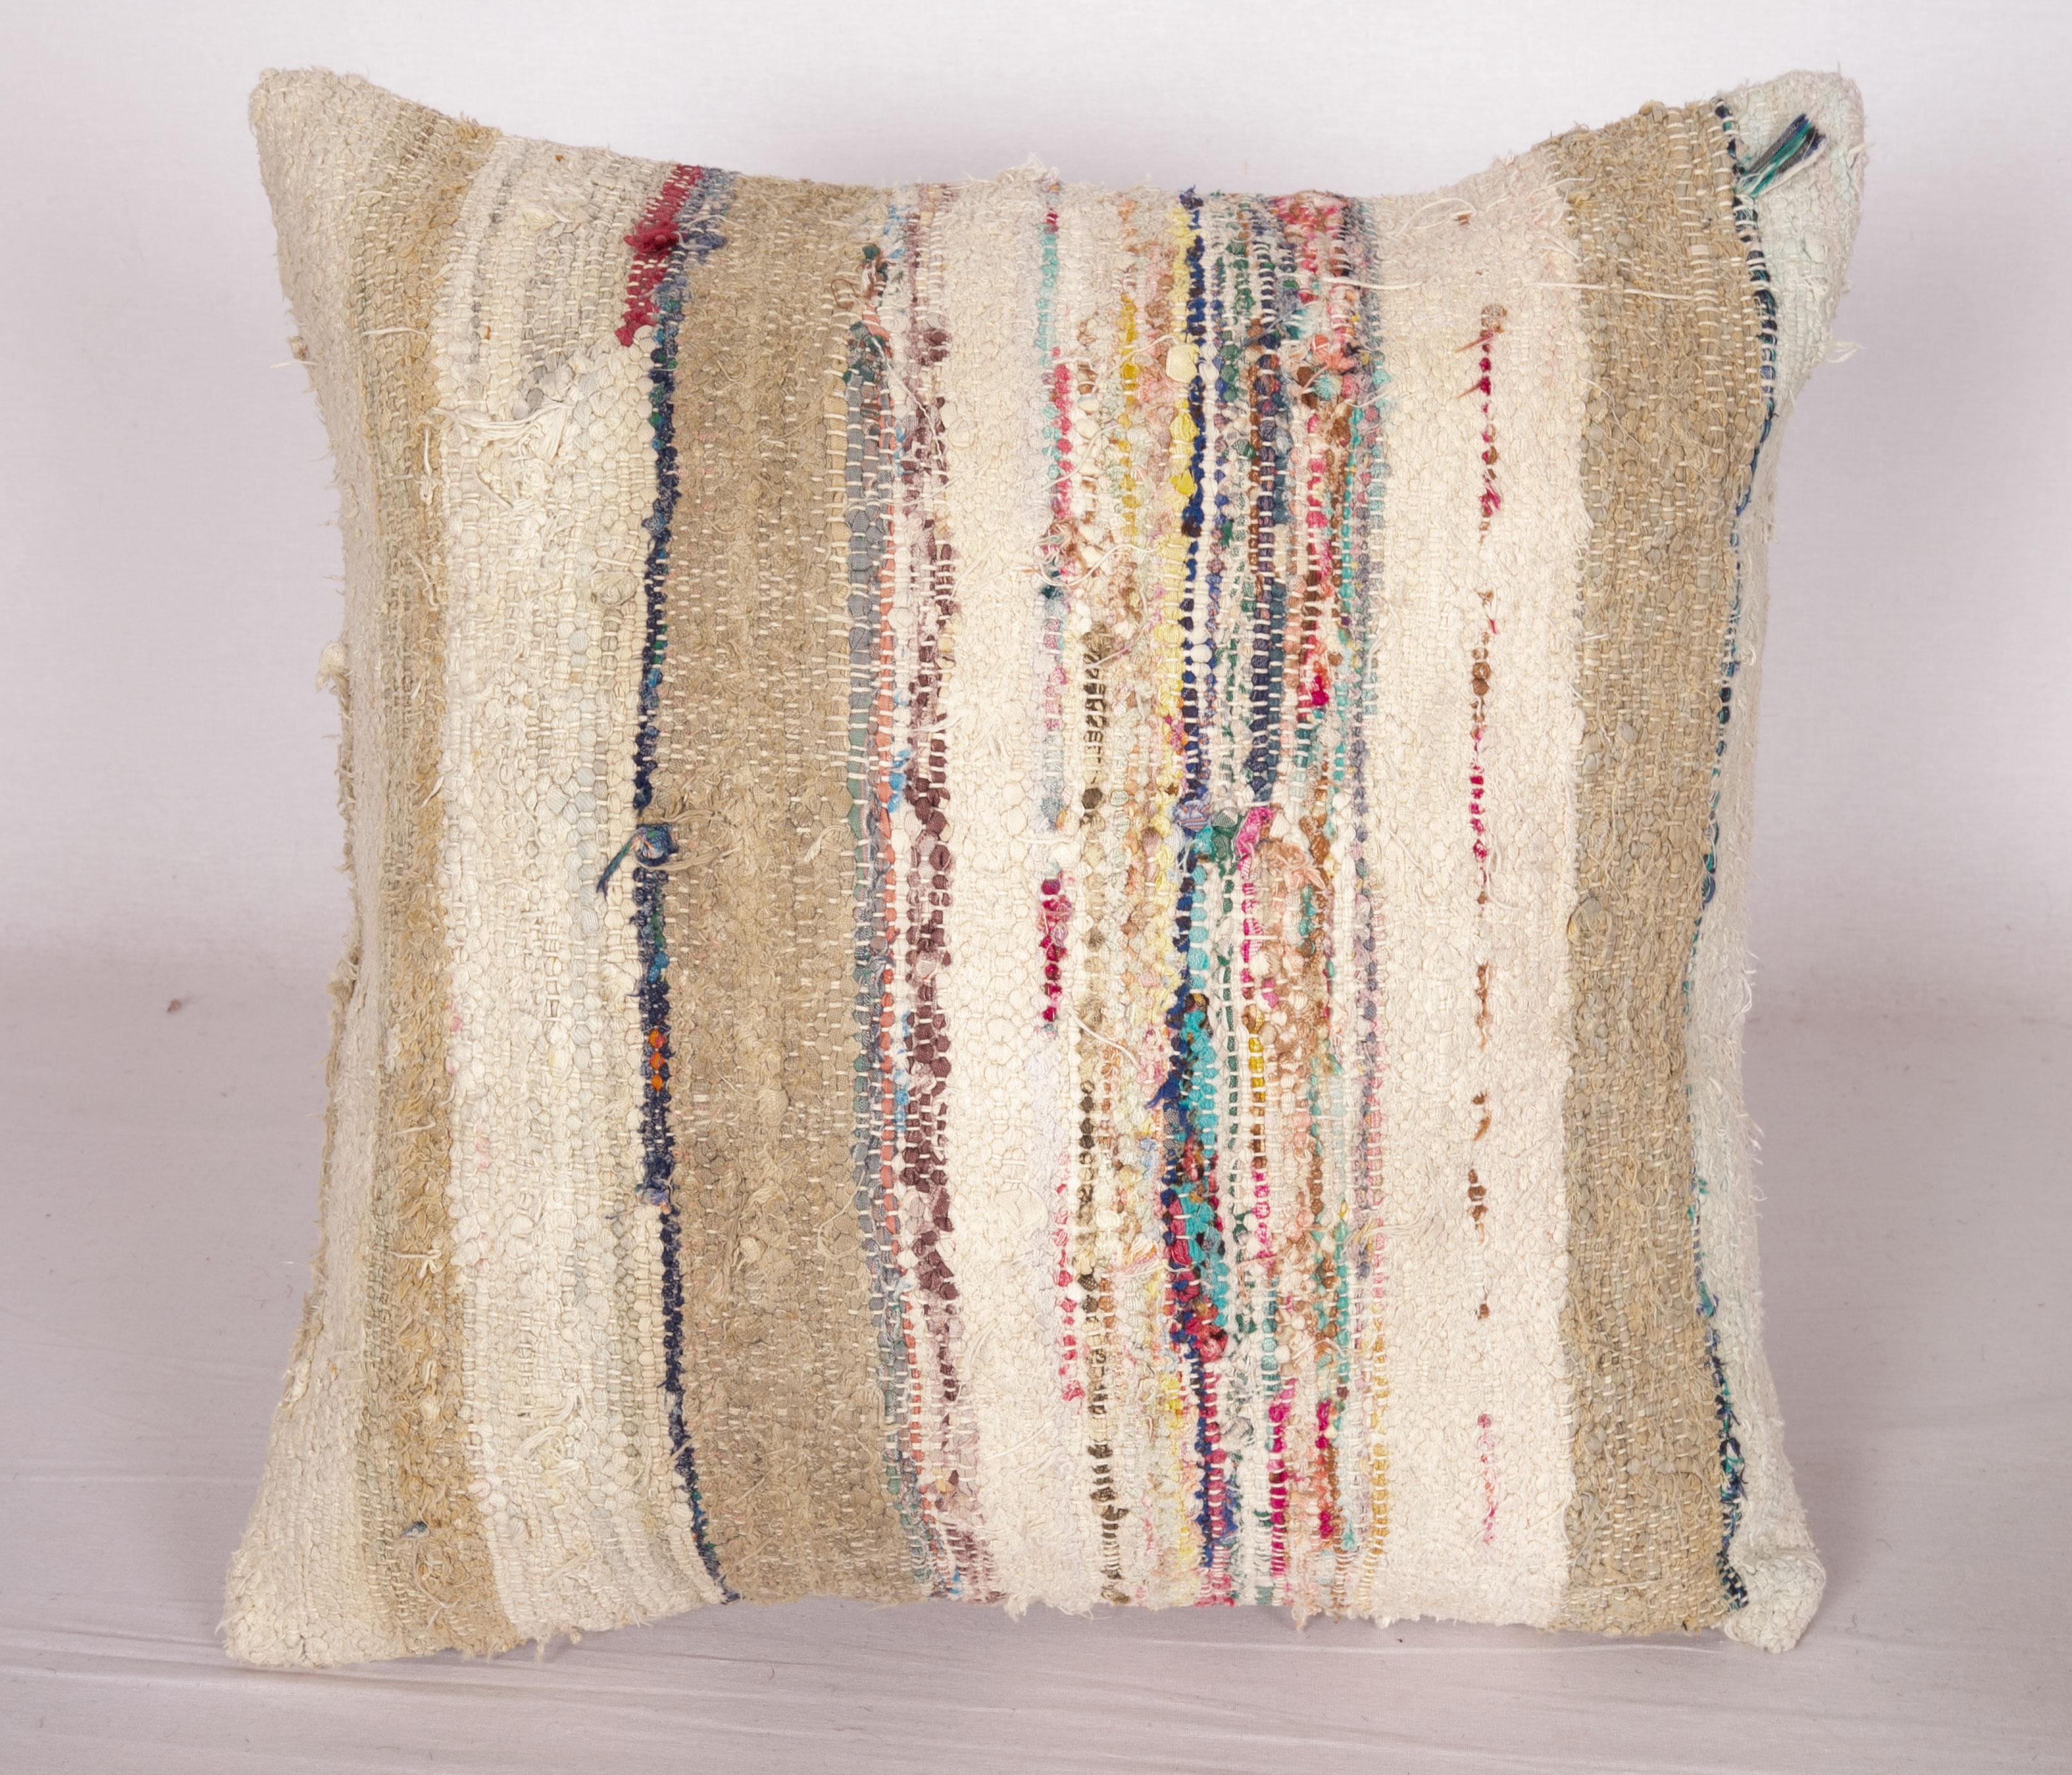 Turkish Rustic Pillow Cases Made from an Anatolian Rag Rug, Mid-20th Century For Sale